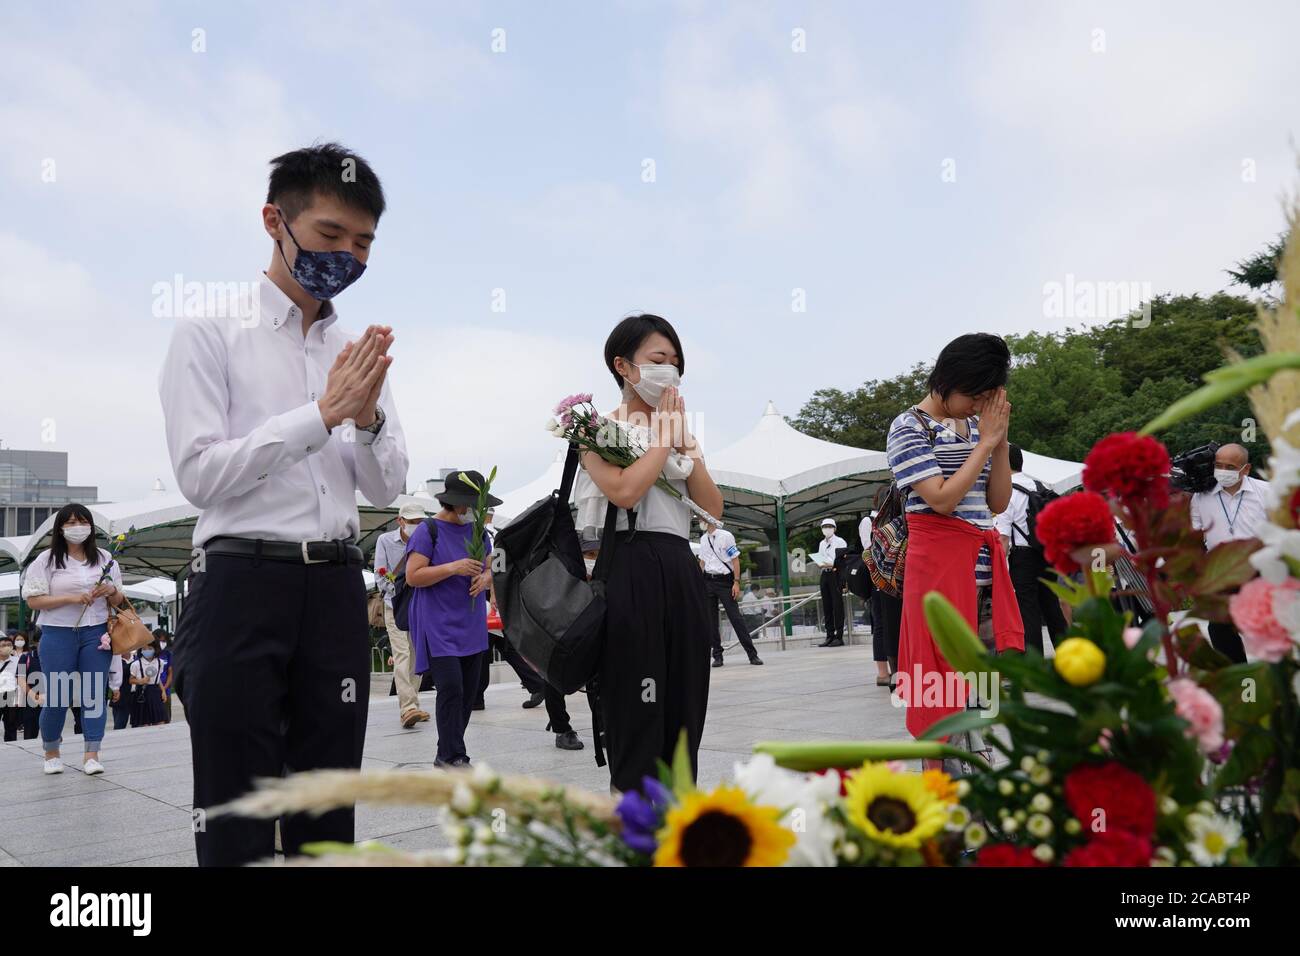 People praying at the Hiroshima Peace Memorial Ceremony.Hiroshima marks the 75th anniversary of the U.S. atomic bombing which killed about 150,000 people and destroyed the entire city during World War II. Stock Photo